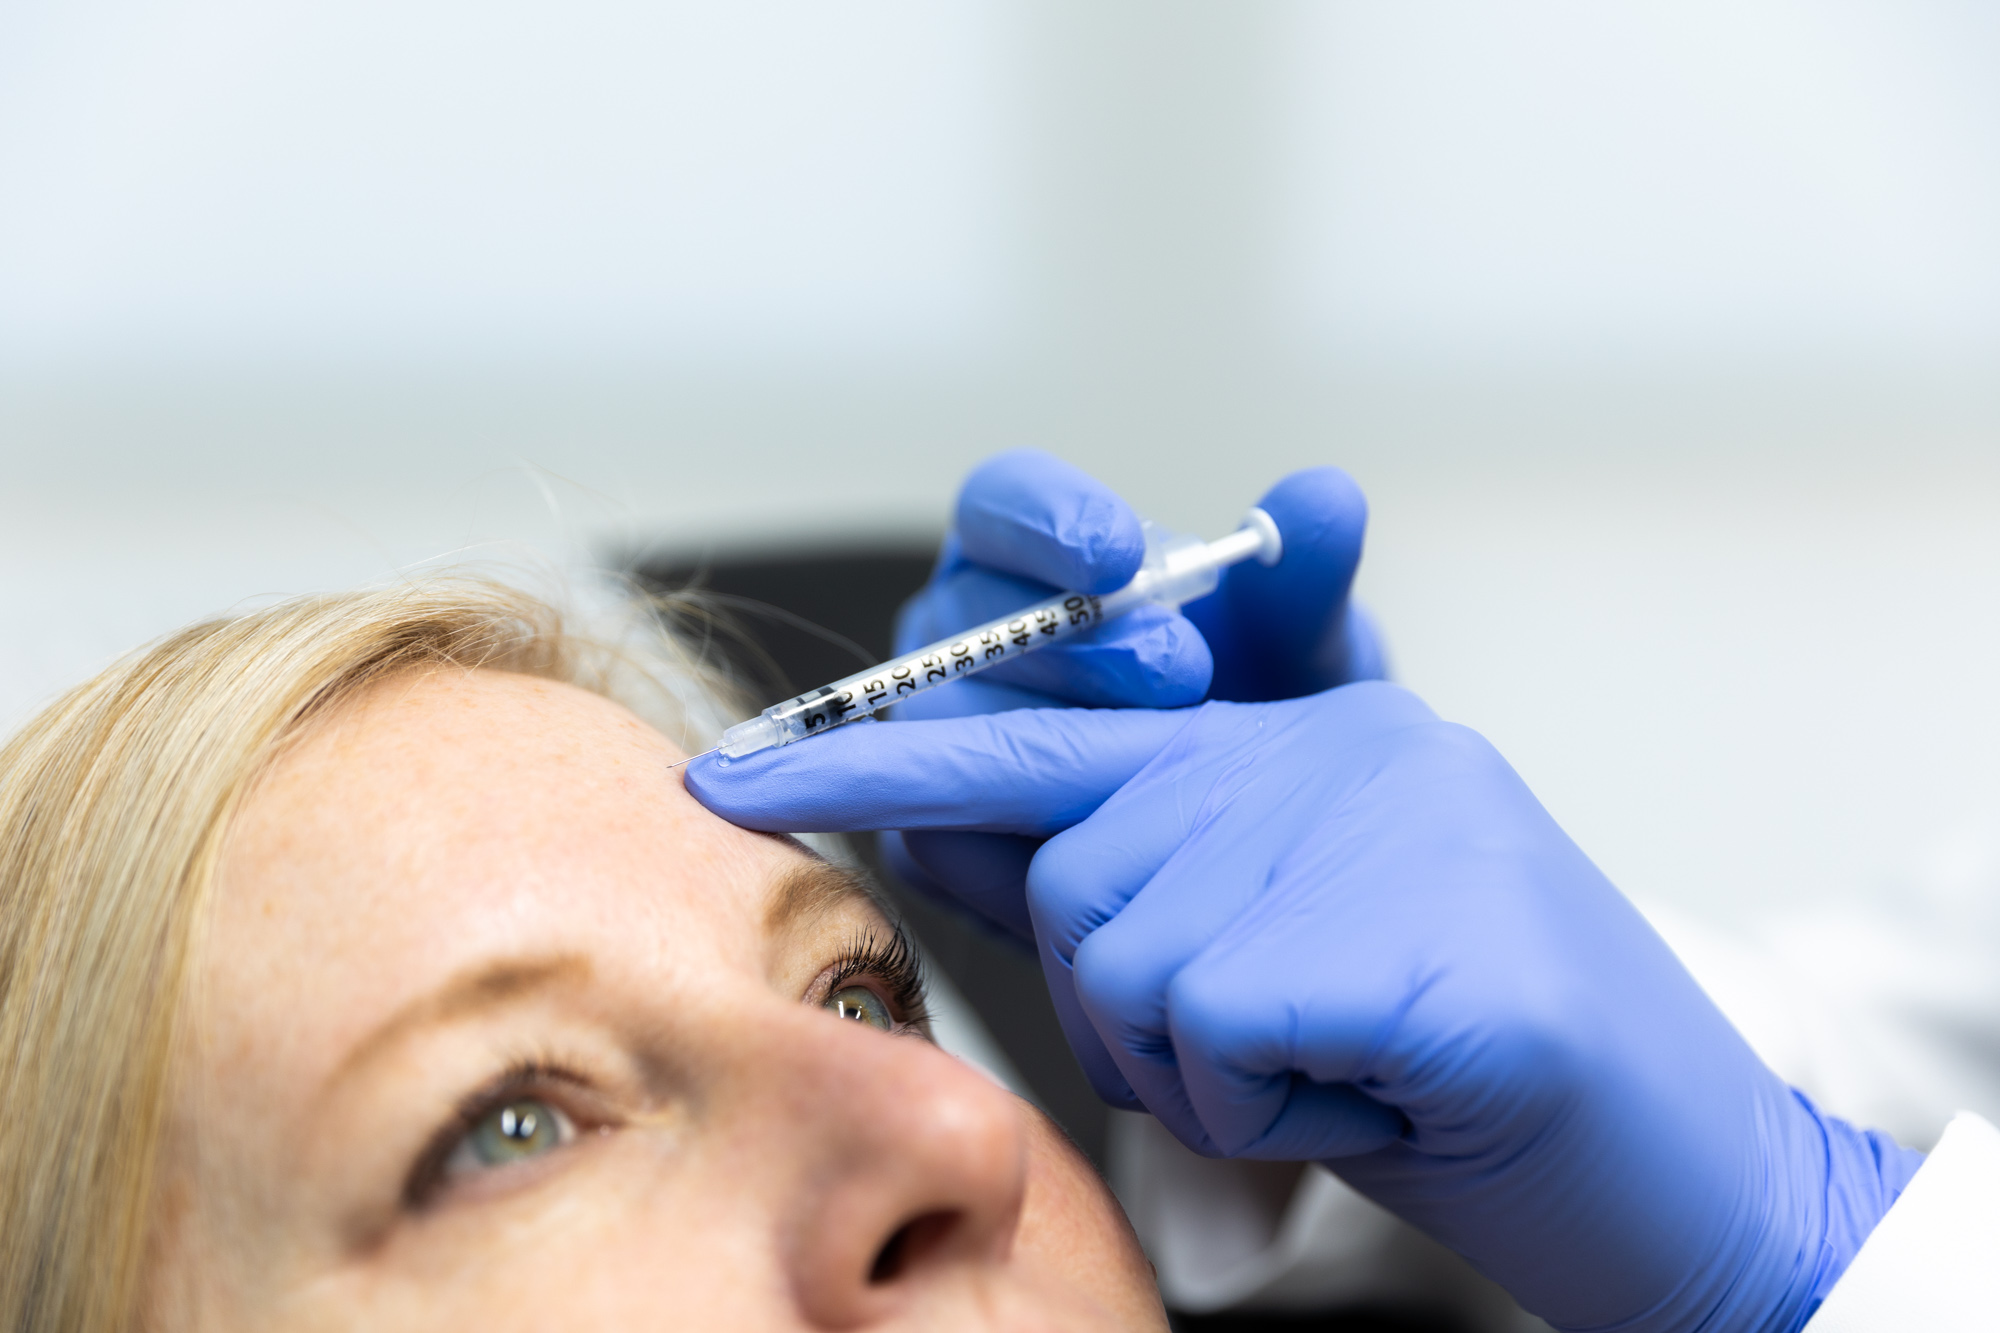 Close up of female patient receiving injectable treatment. Only her nose up is visible. Medical professional wearing blue gloves injects the needle into patient's forehead.